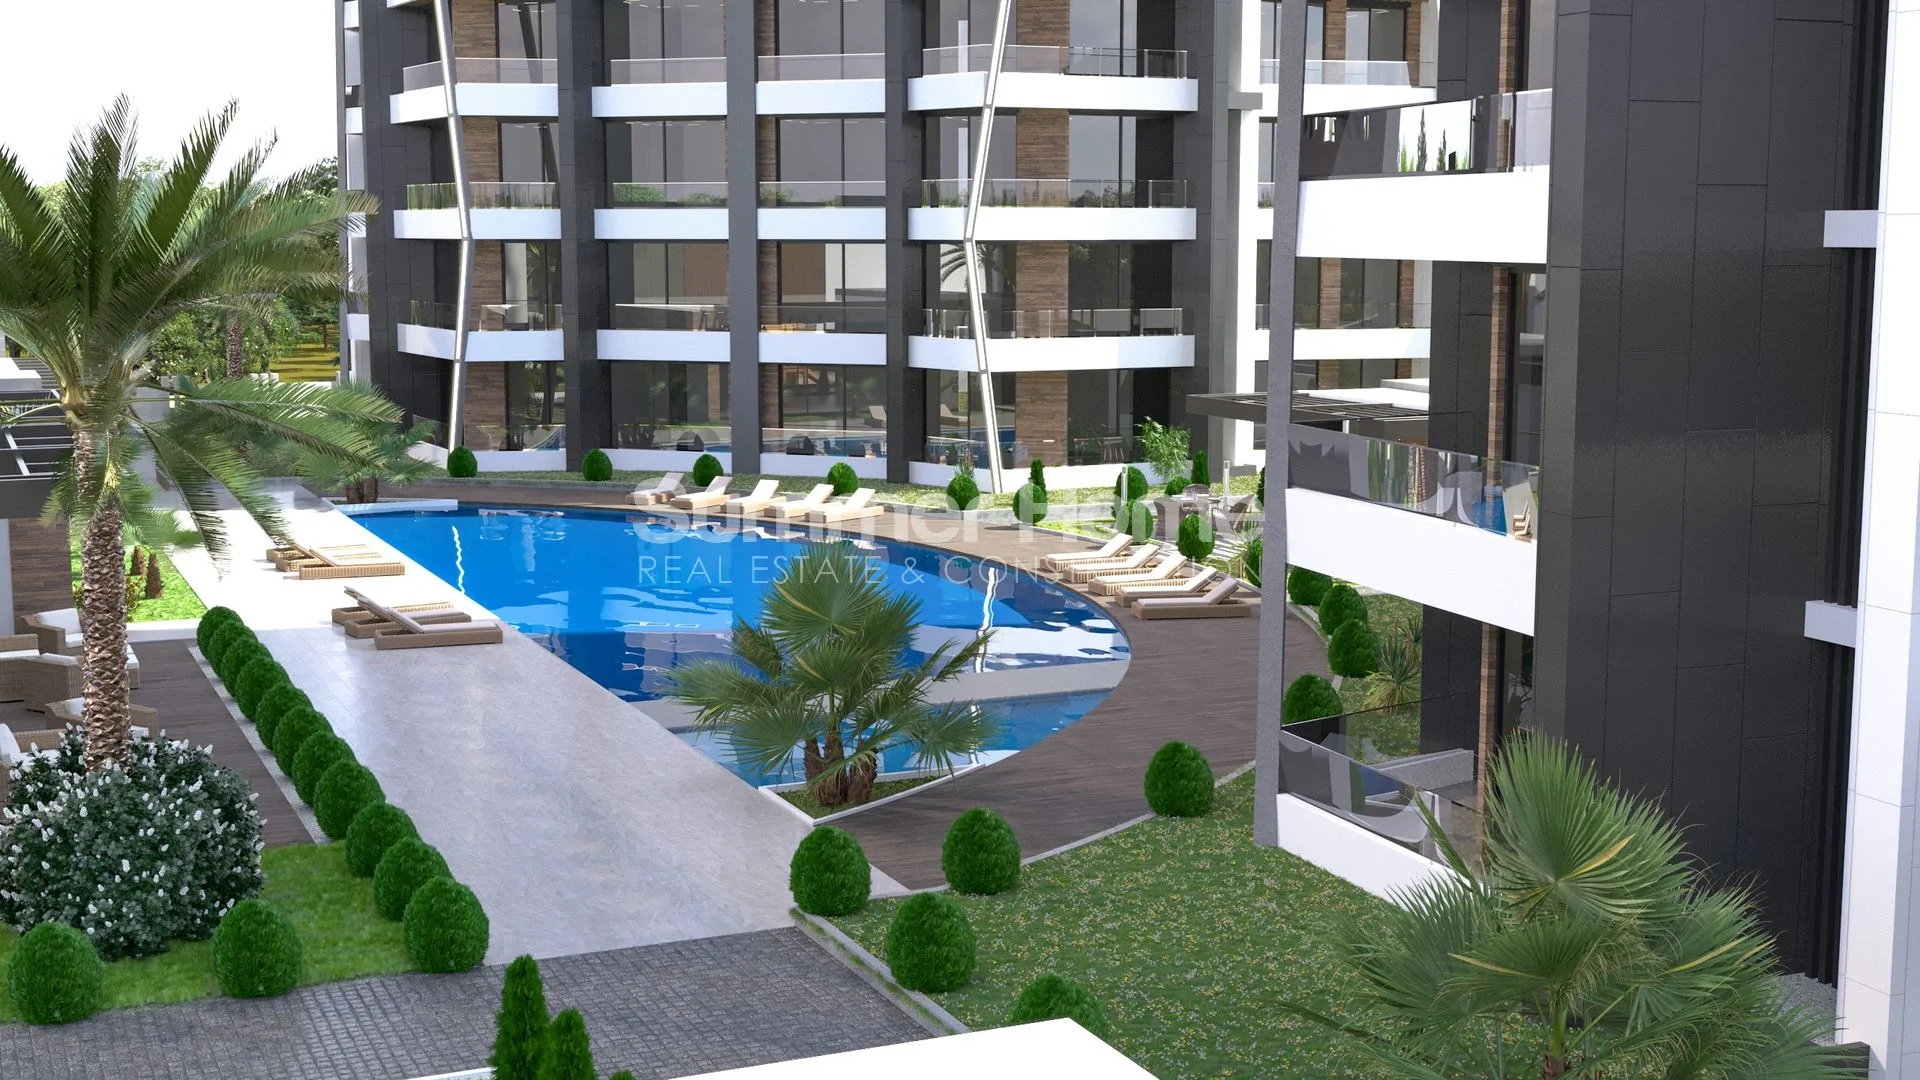 Stunning twin tower in the modern part of Antalya, Altint Facilities - 18